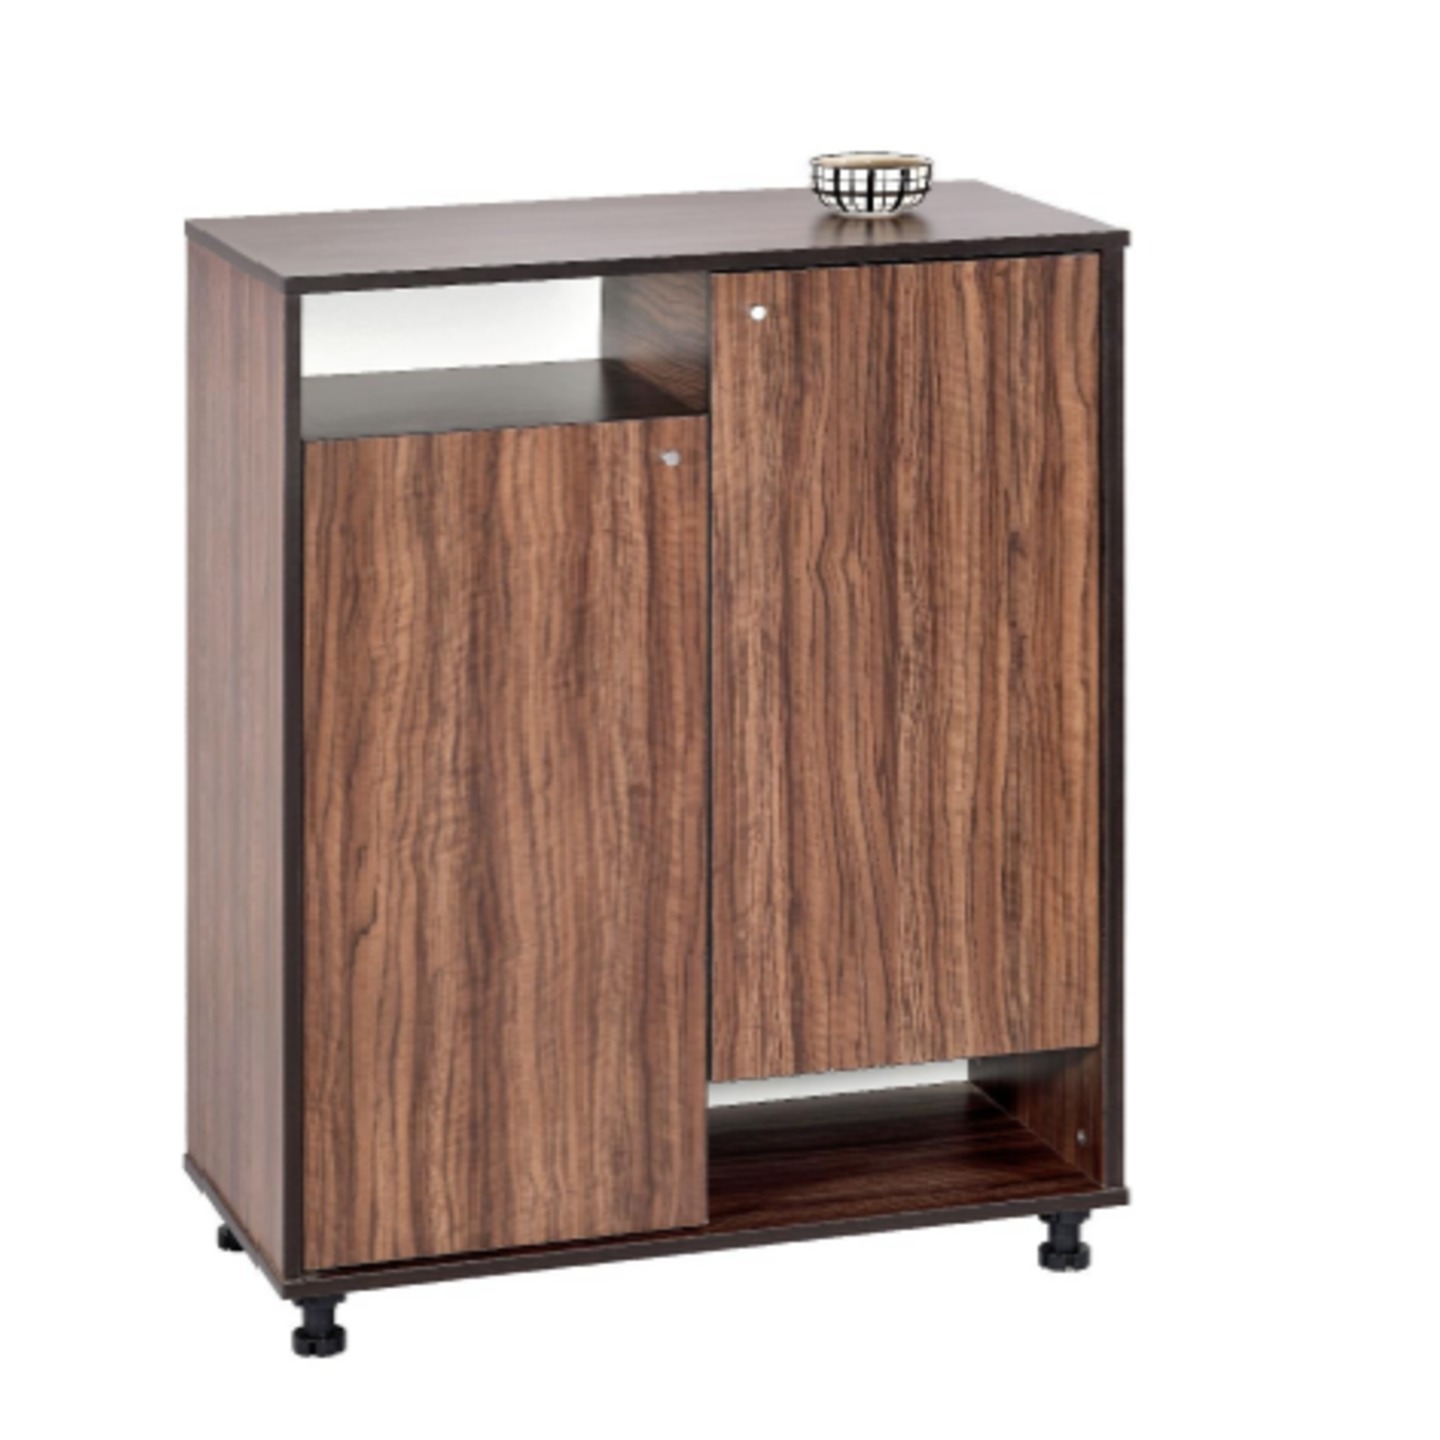 RD Multi Utility Cabinets RD-612 In Brown Colour